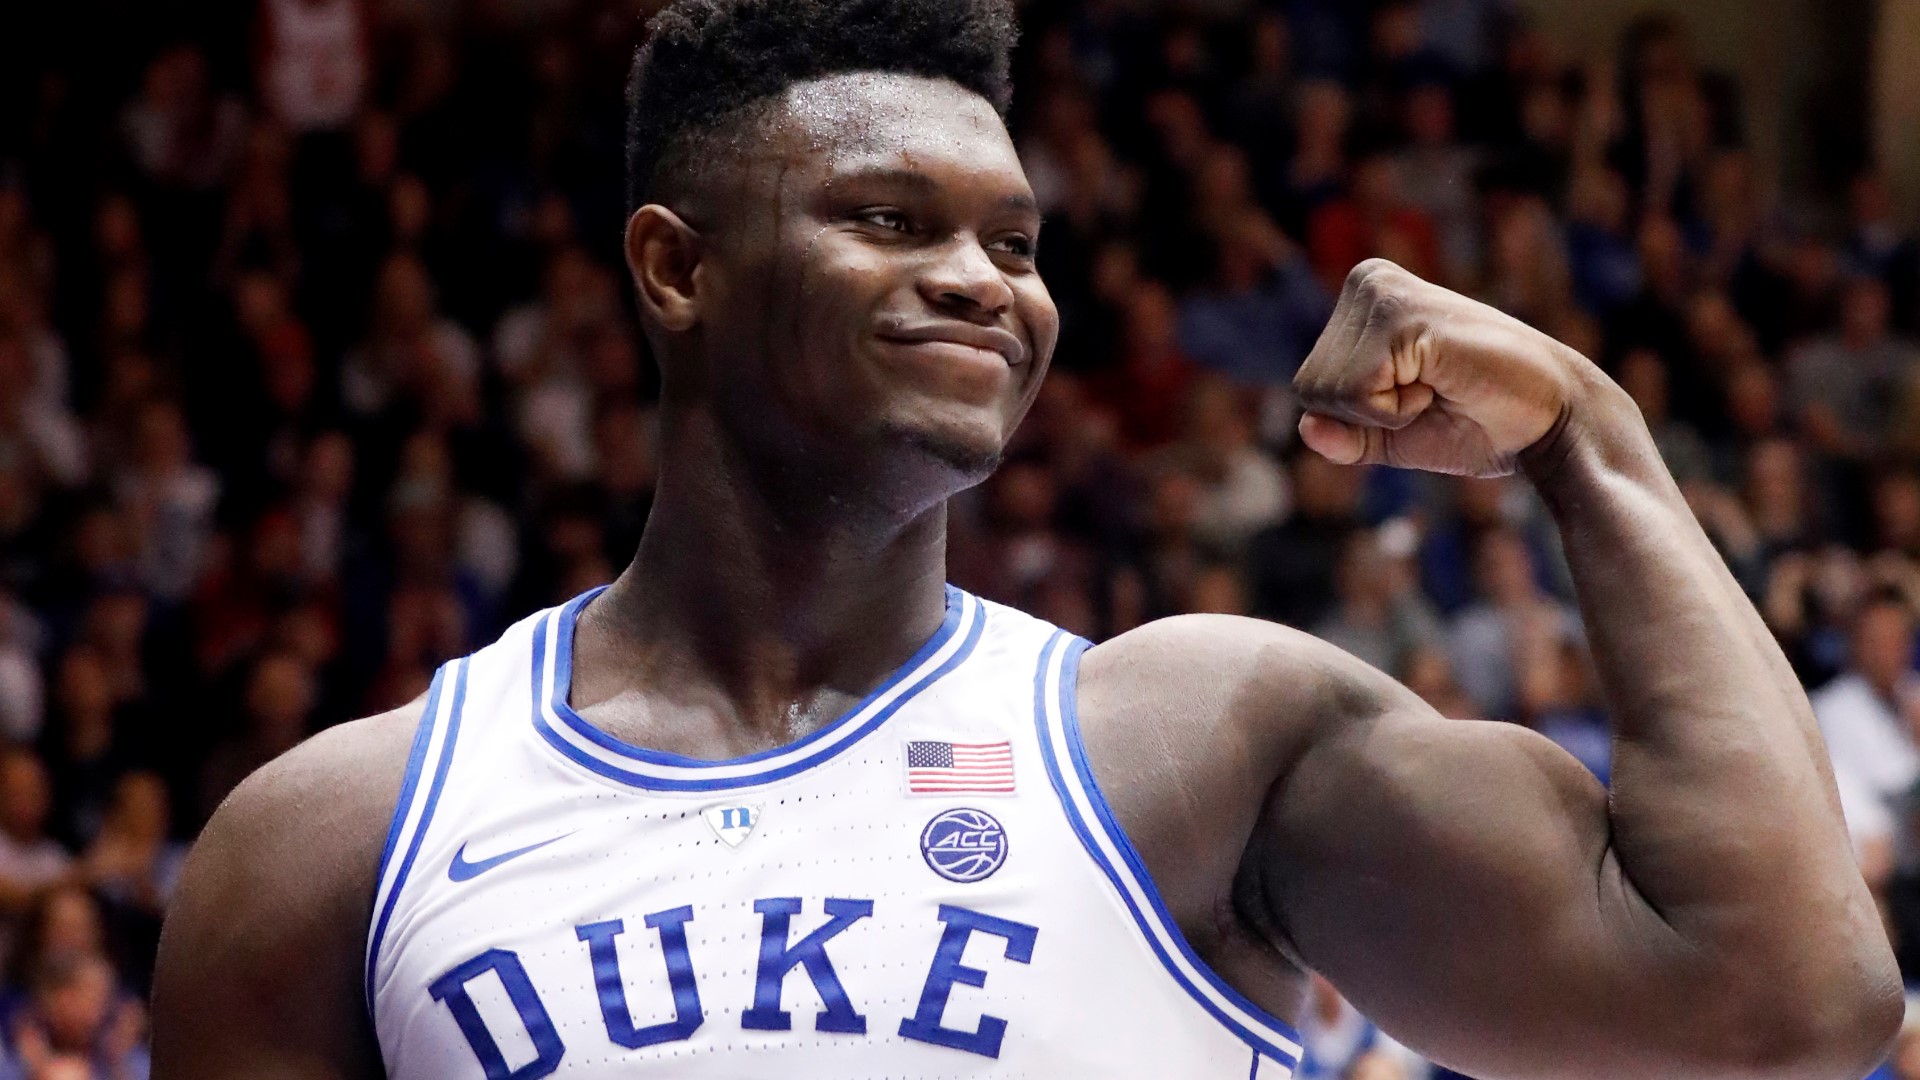 Duke freshman superstar and ACC Player of the Year Zion Williamson is expected to make his highly anticipated return to the court after injuring his knee against rival North Carolina in February.